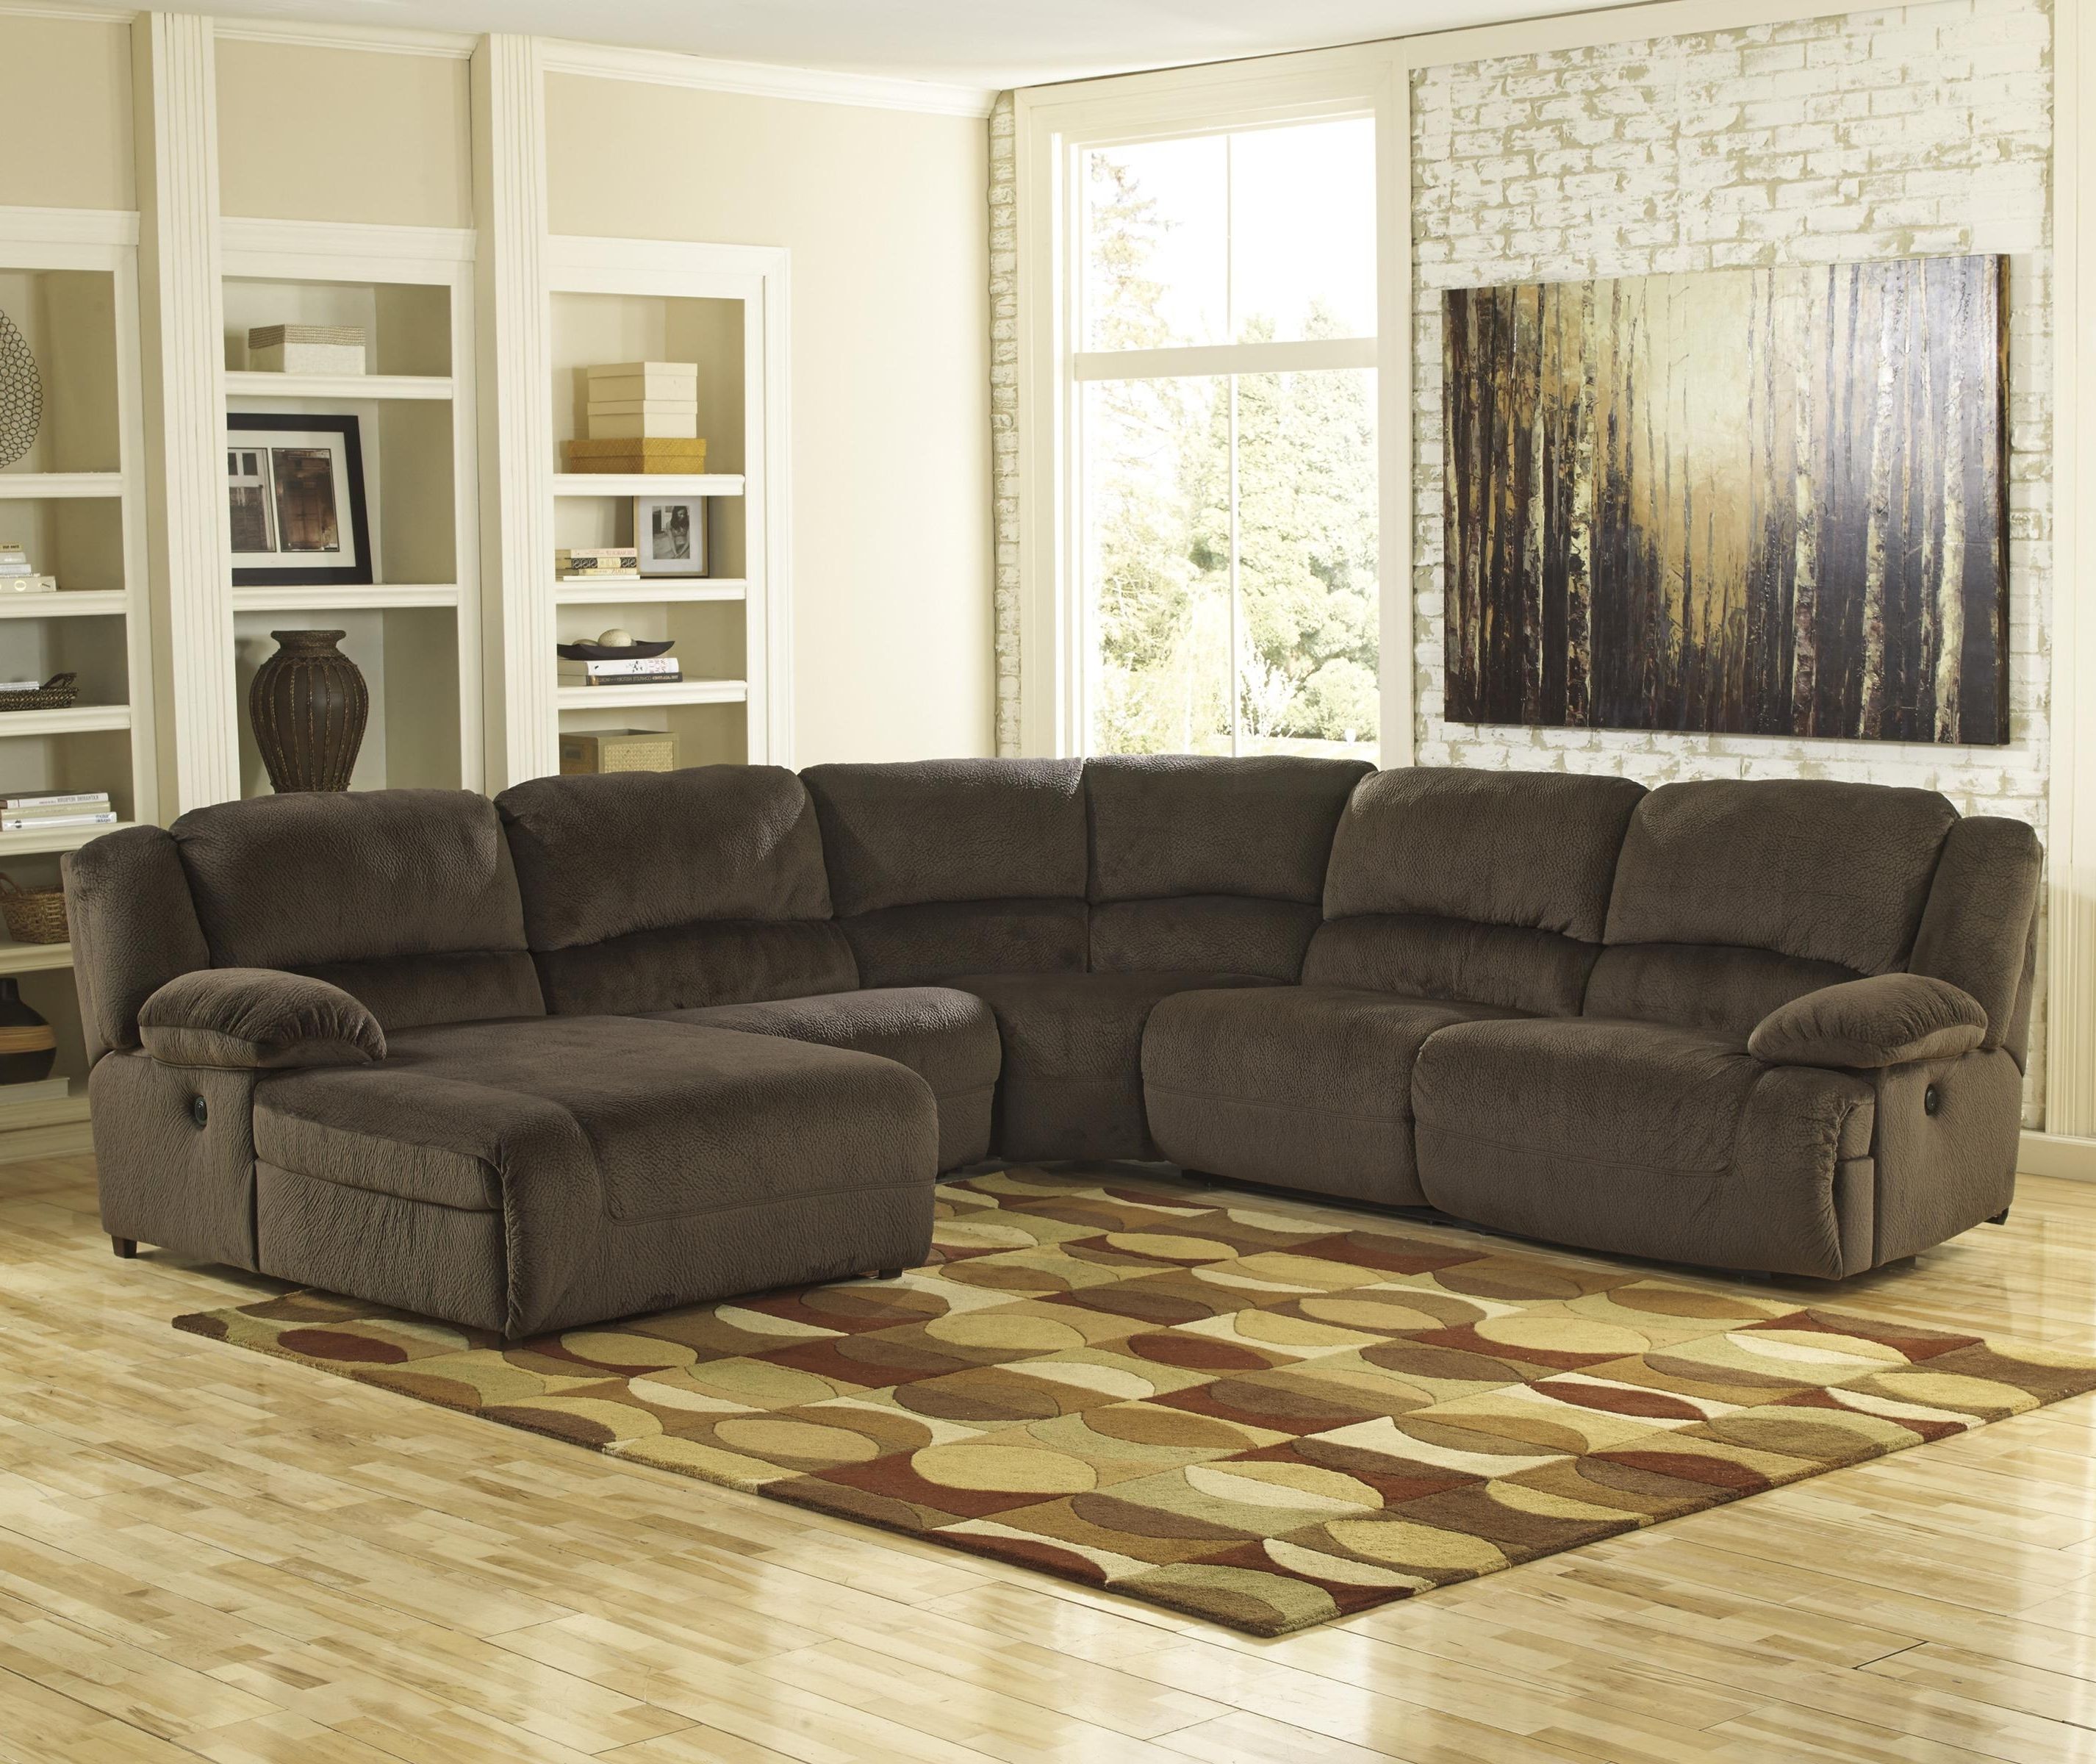 Toletta – Chocolate Power Reclining Sectional With Chaise For Newest Reclining Sectionals With Chaise (View 1 of 15)